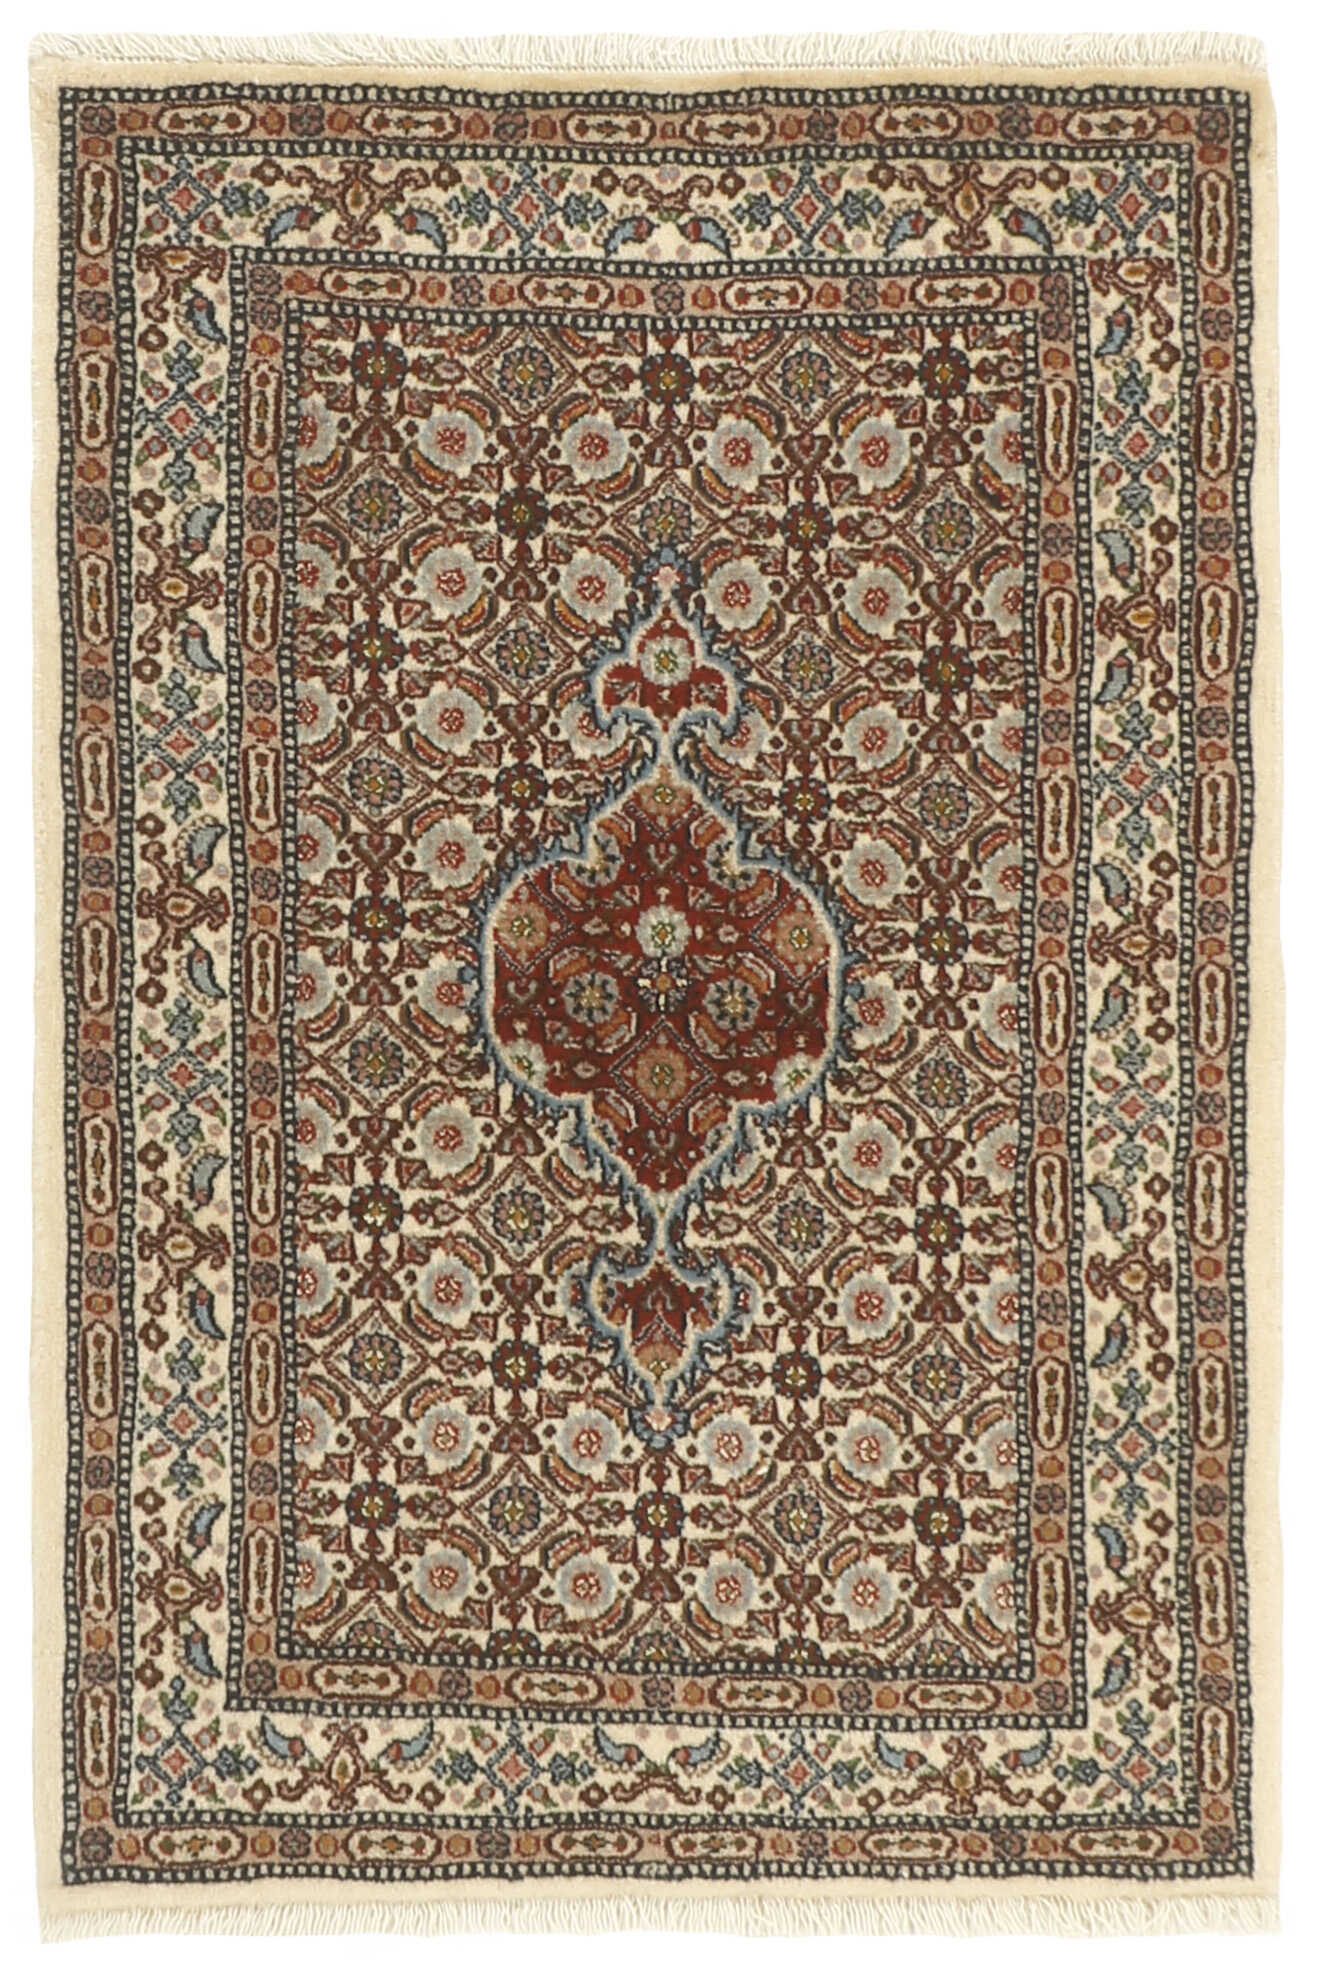 authentic persian rug with traditional floral pattern in cream, blue and red